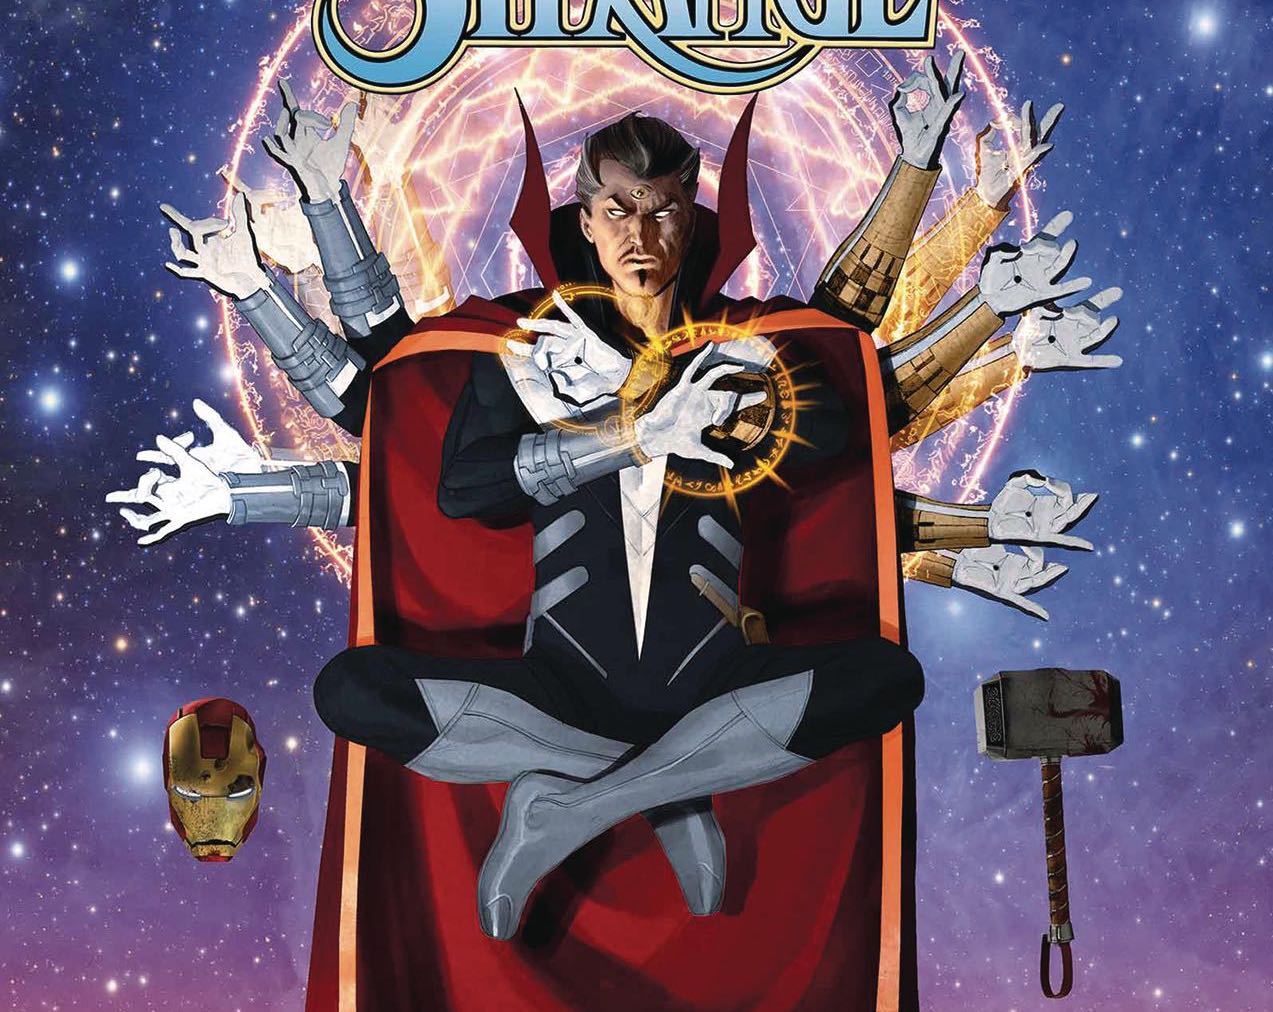 Doctor Strange by Mark Waid Vol. 4: The Choice Review